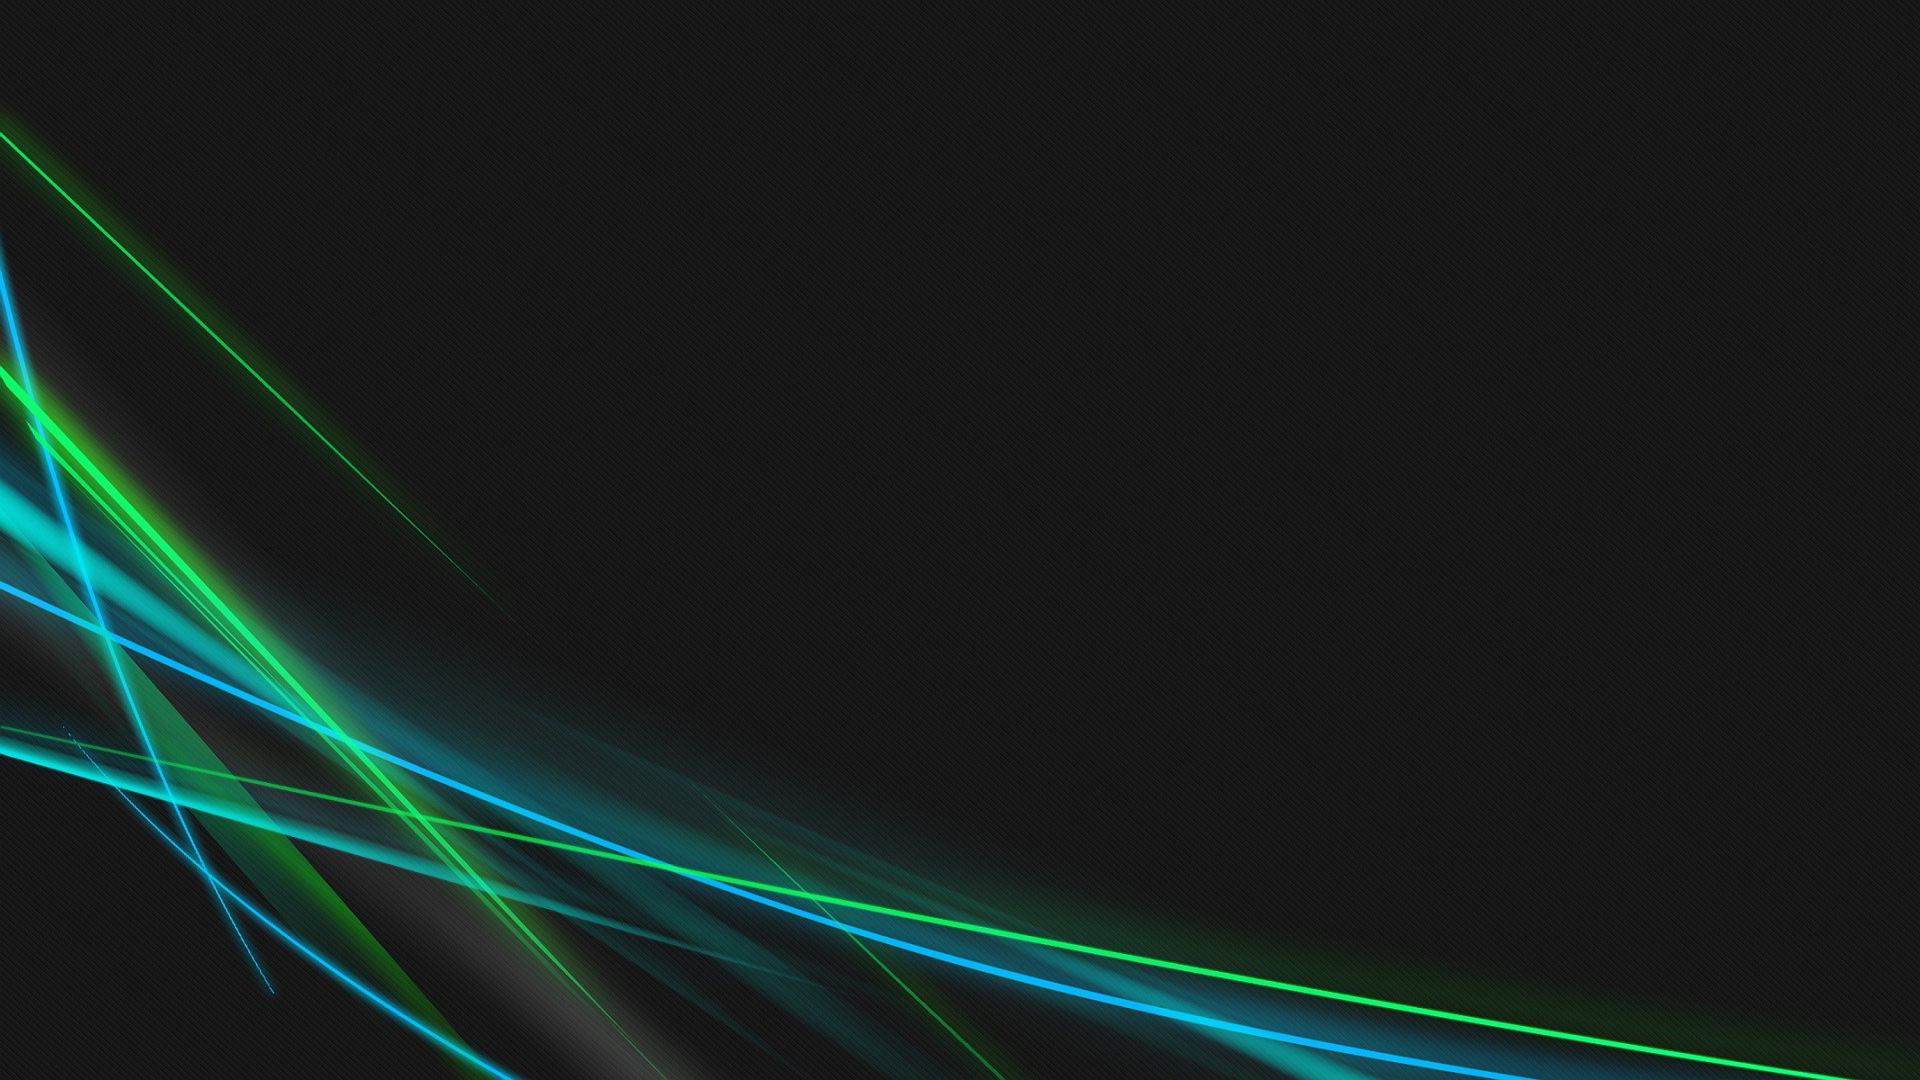 Blue And Green Neon Curves Wallpaper - Abstract Blue Green Black - HD Wallpaper 